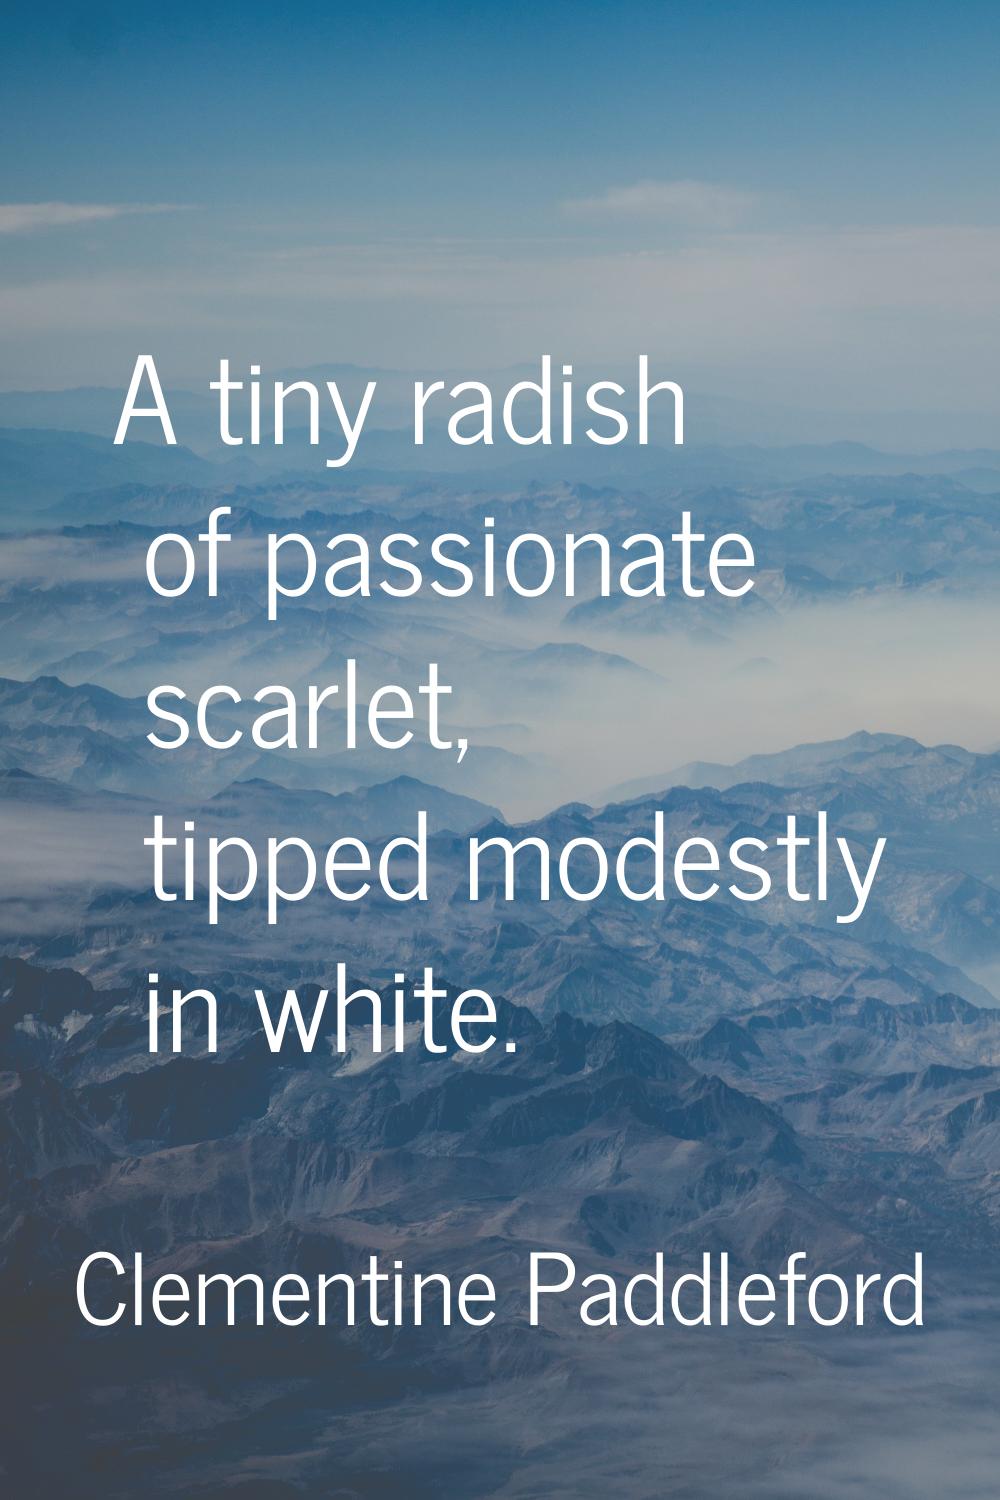 A tiny radish of passionate scarlet, tipped modestly in white.